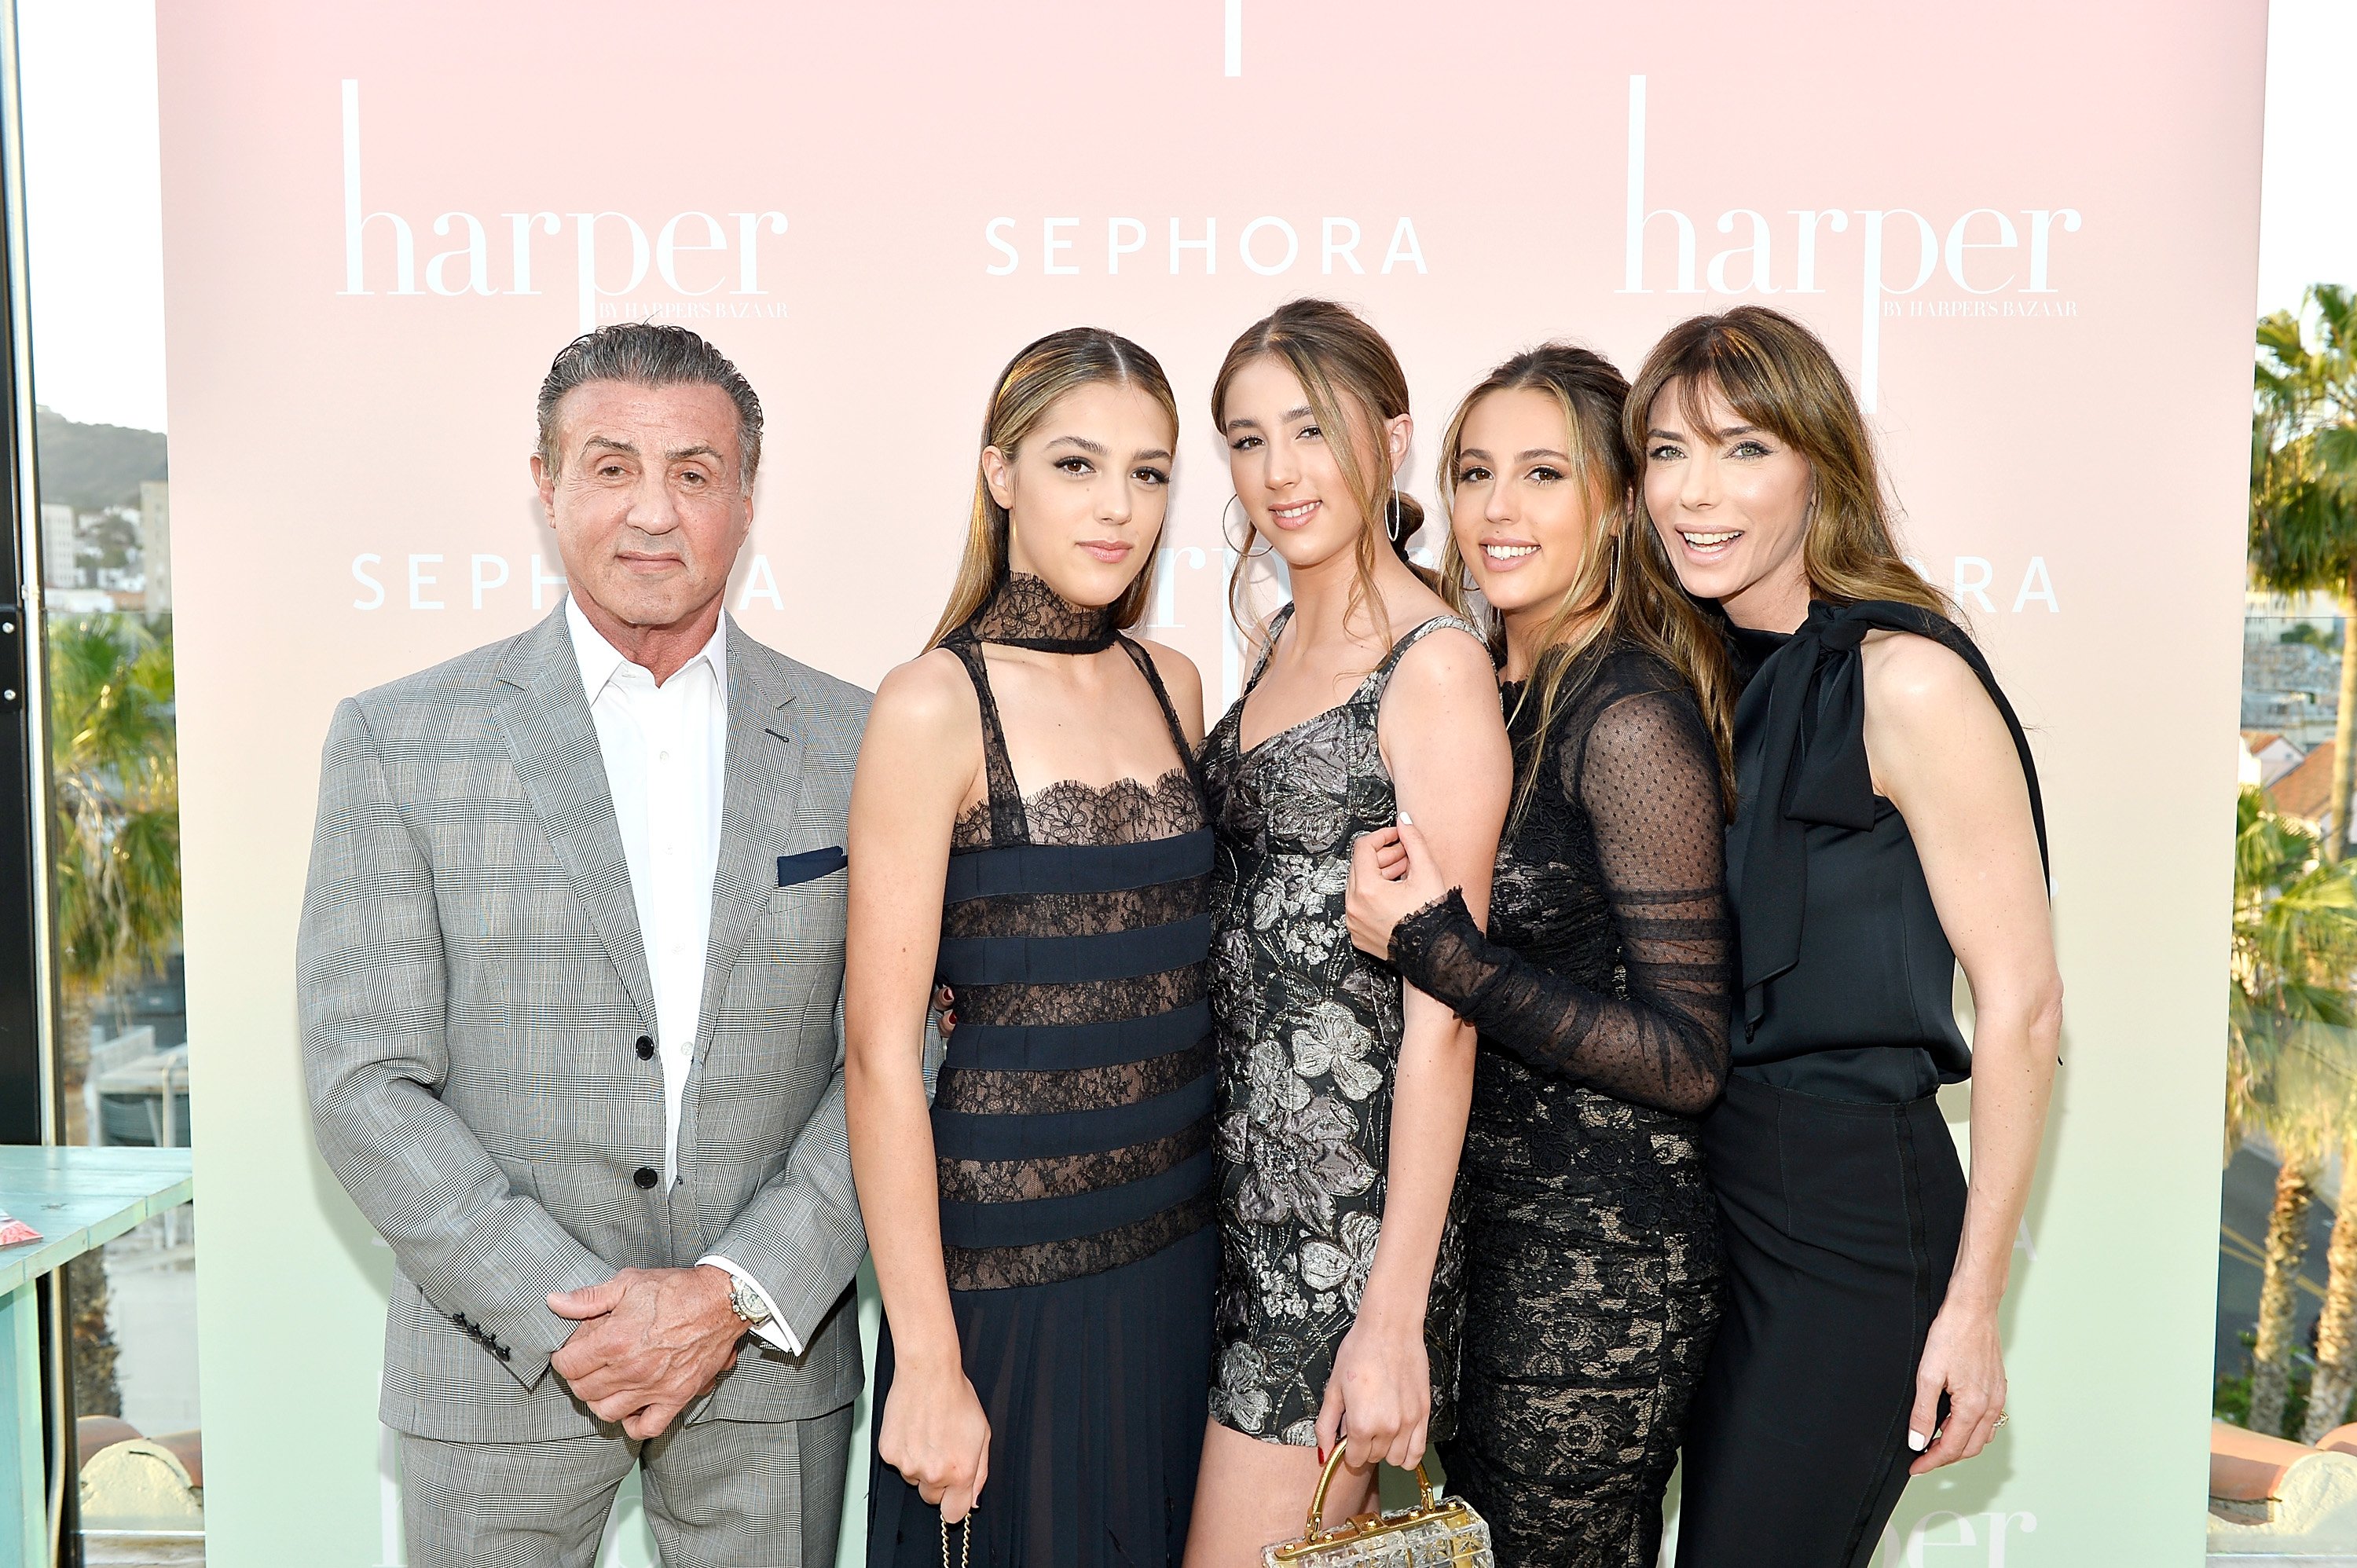 : Sylvester Stallone; Sistine Stallone; Scarlet Stallone; Sophia Stallone and Jennifer Flavin Stallone harper x Harper's BAZAAR May Issue | Photo: Getty Images